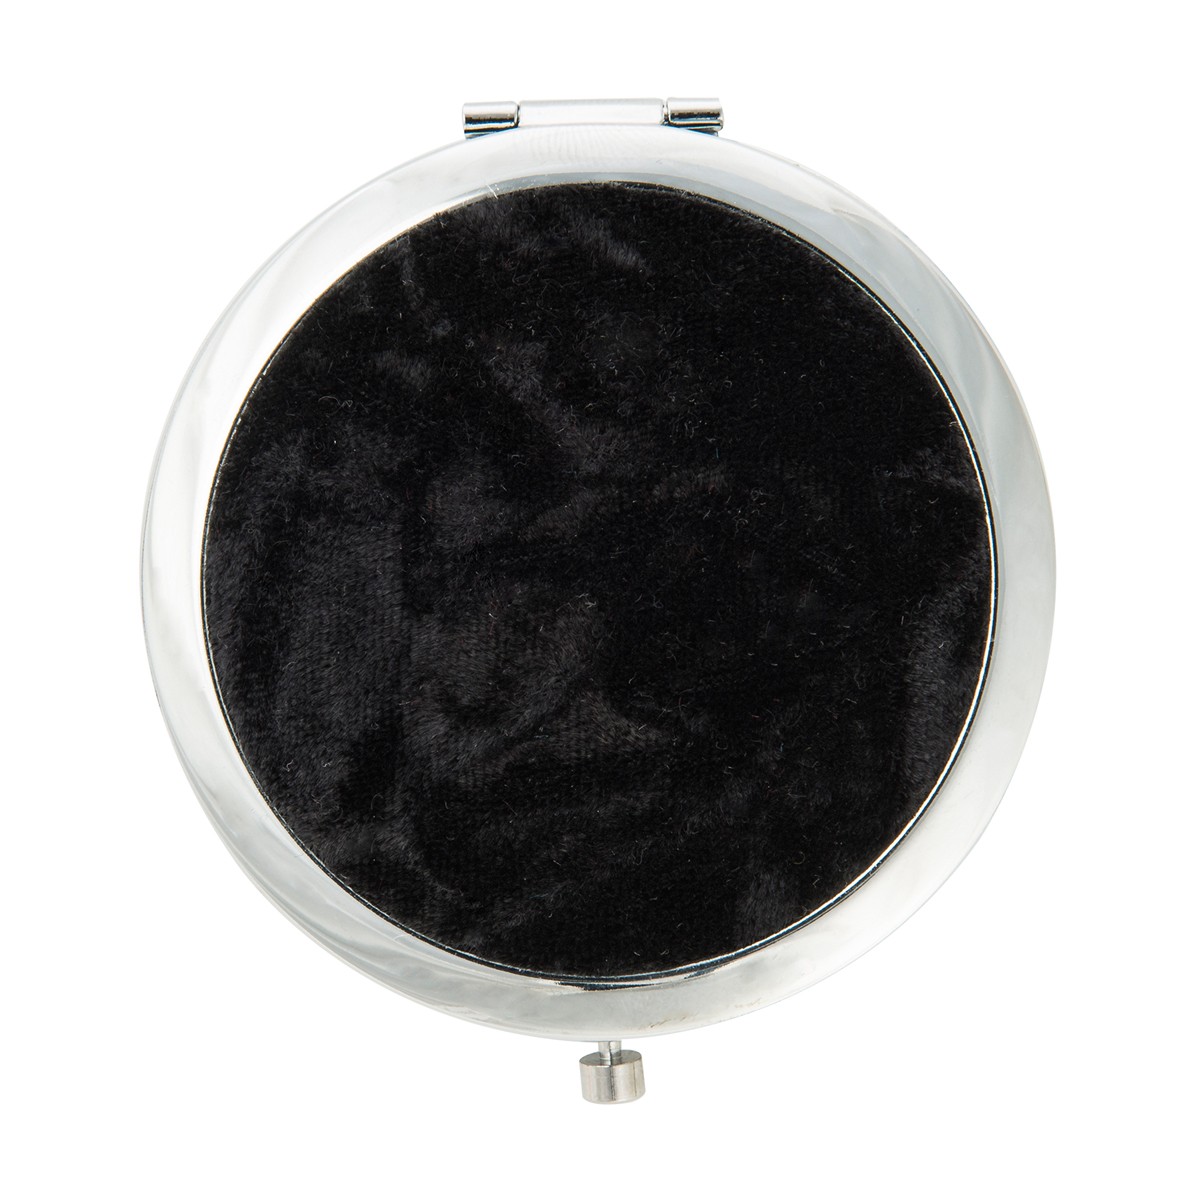 soft touch black velvet compact mirror pocket mirror compact hand mirror round  shaped